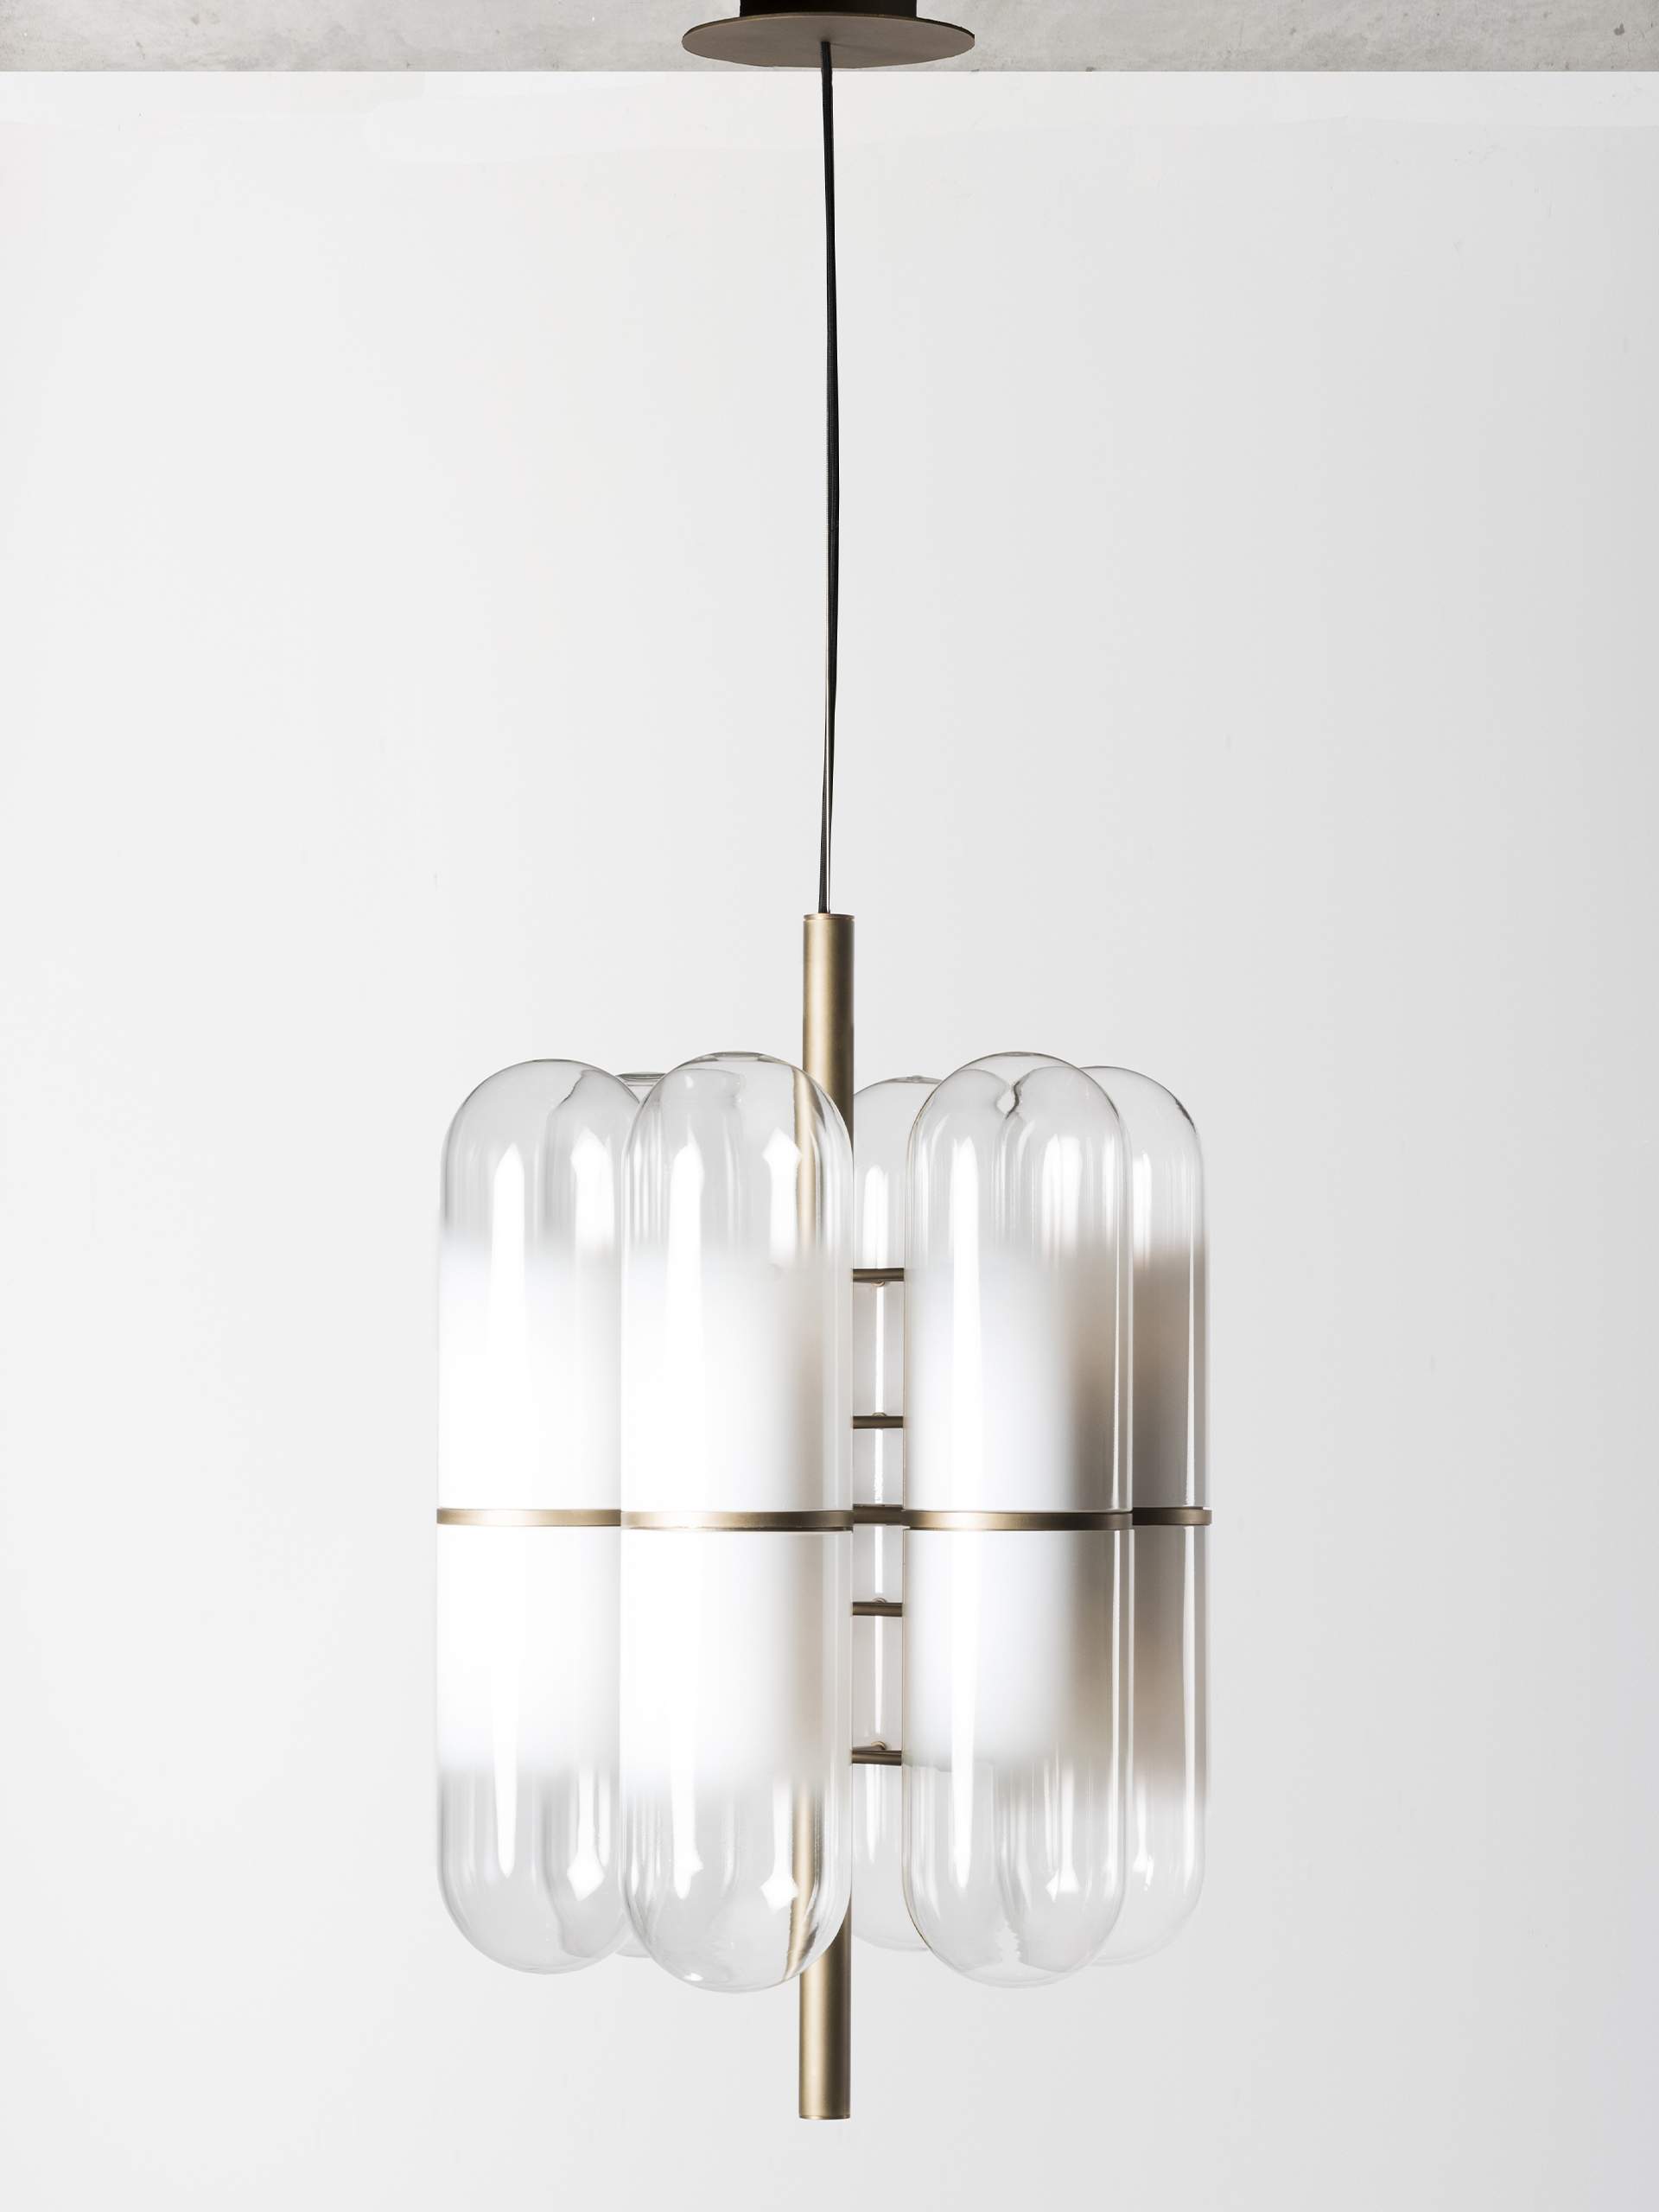 5. Charlotte, suspension in burnished brass and glass available in two sizes, for galleria Nilufar - ph. © Daniele Iodice